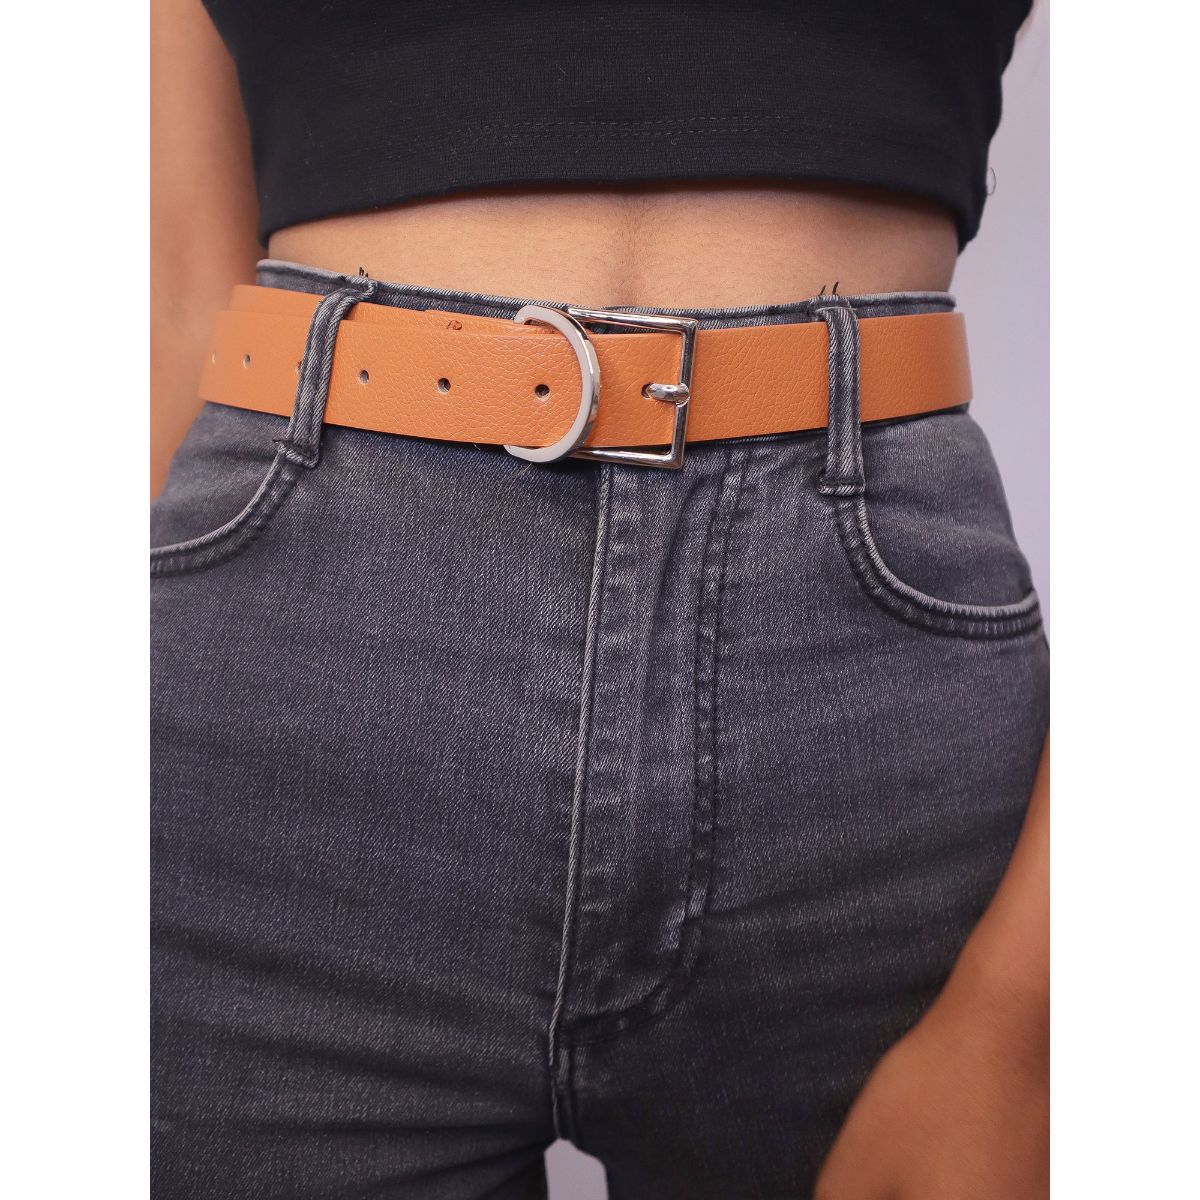 Tan Faux Leather Silver Square Buckle Belt